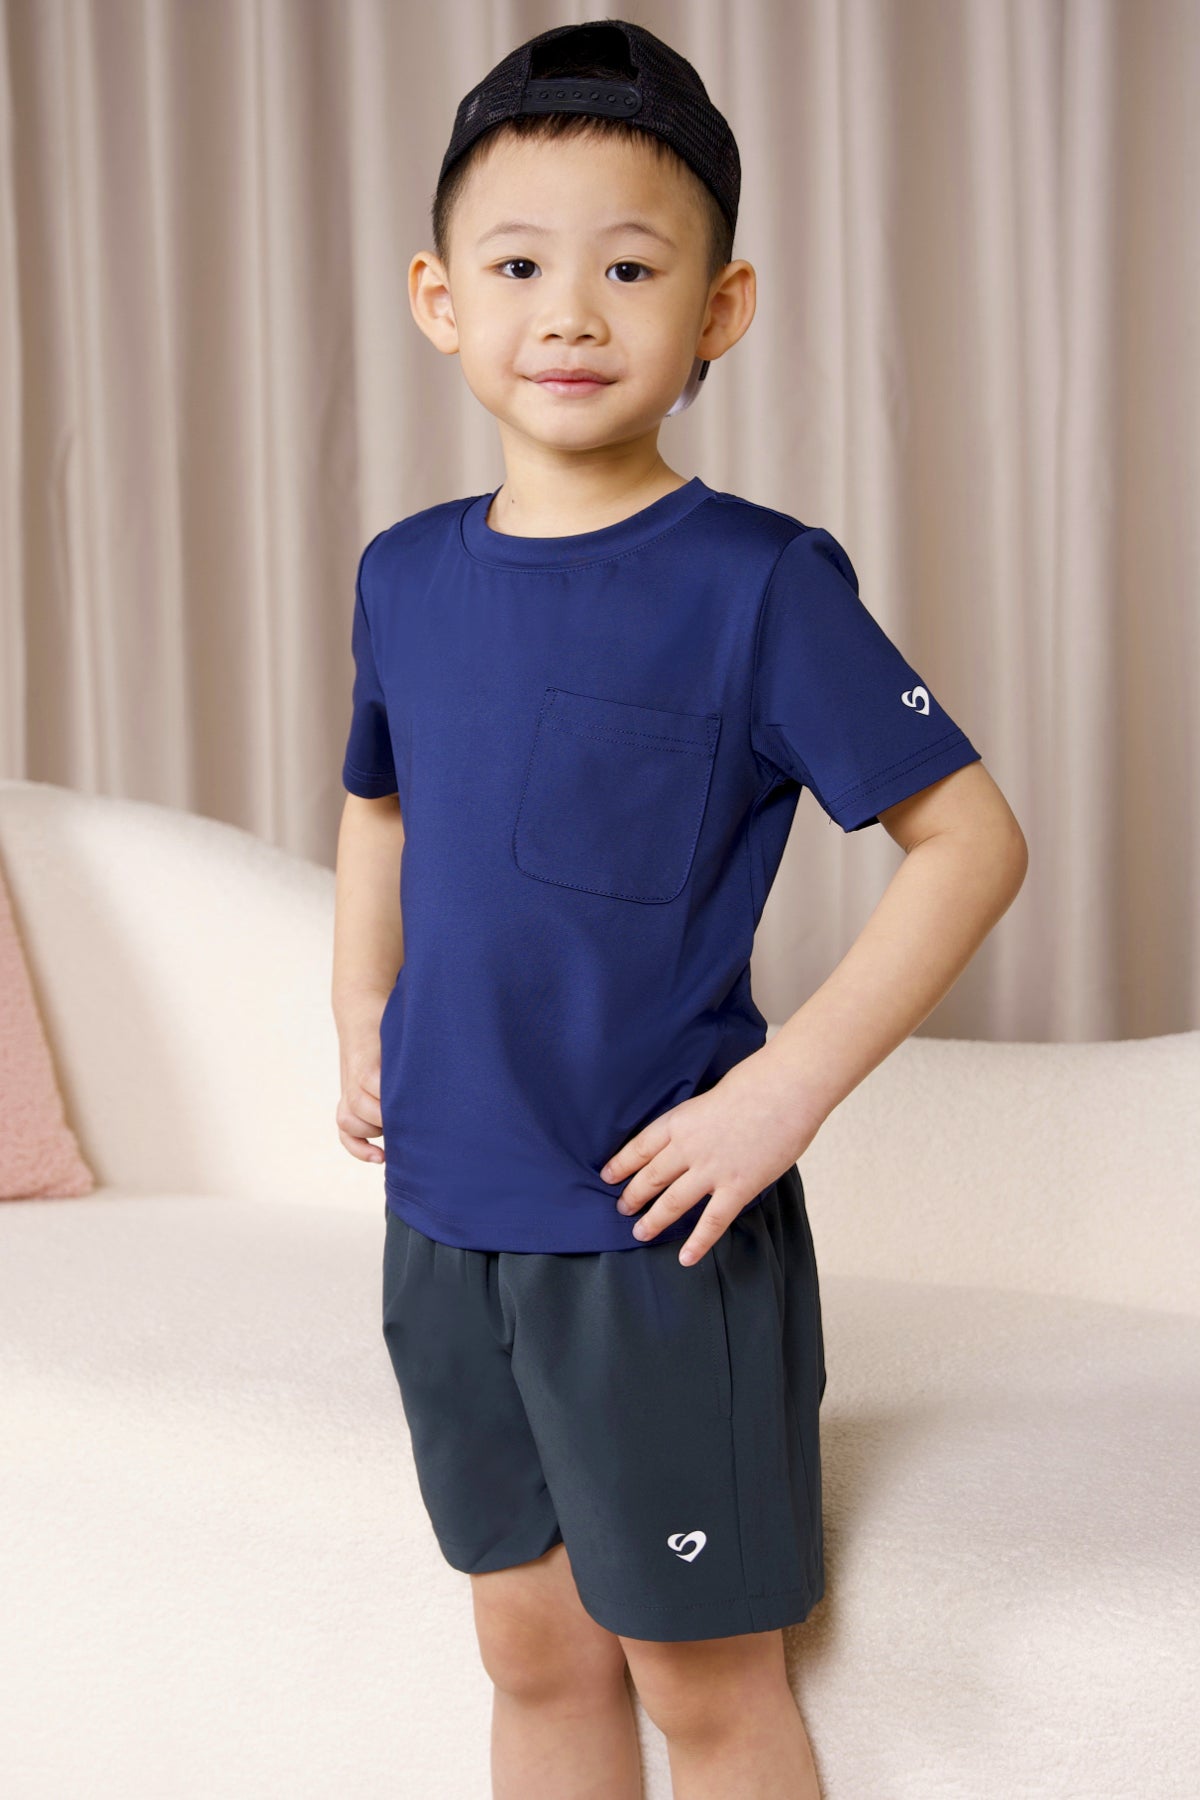 Kid's Tee with pocket Navy Blue